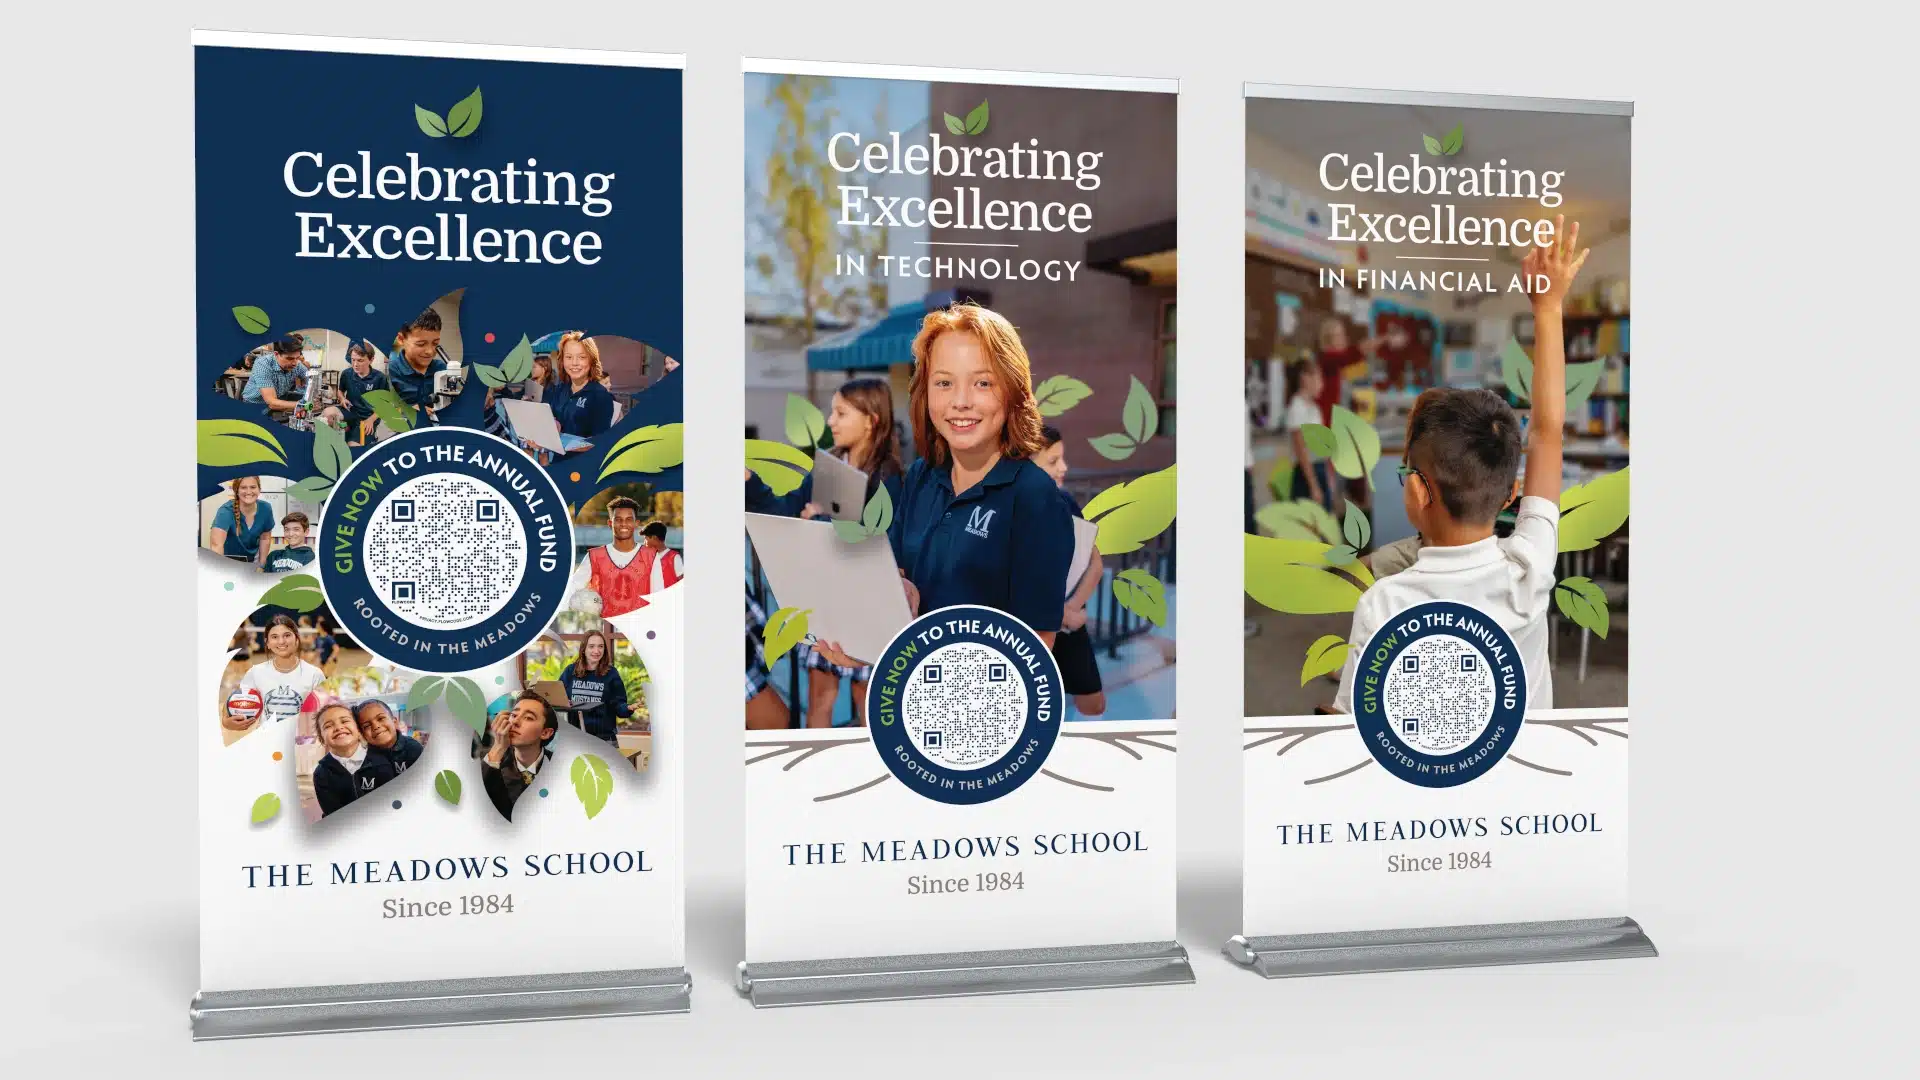 The Meadows School Fundraising campaign pop-up banners featuring young students